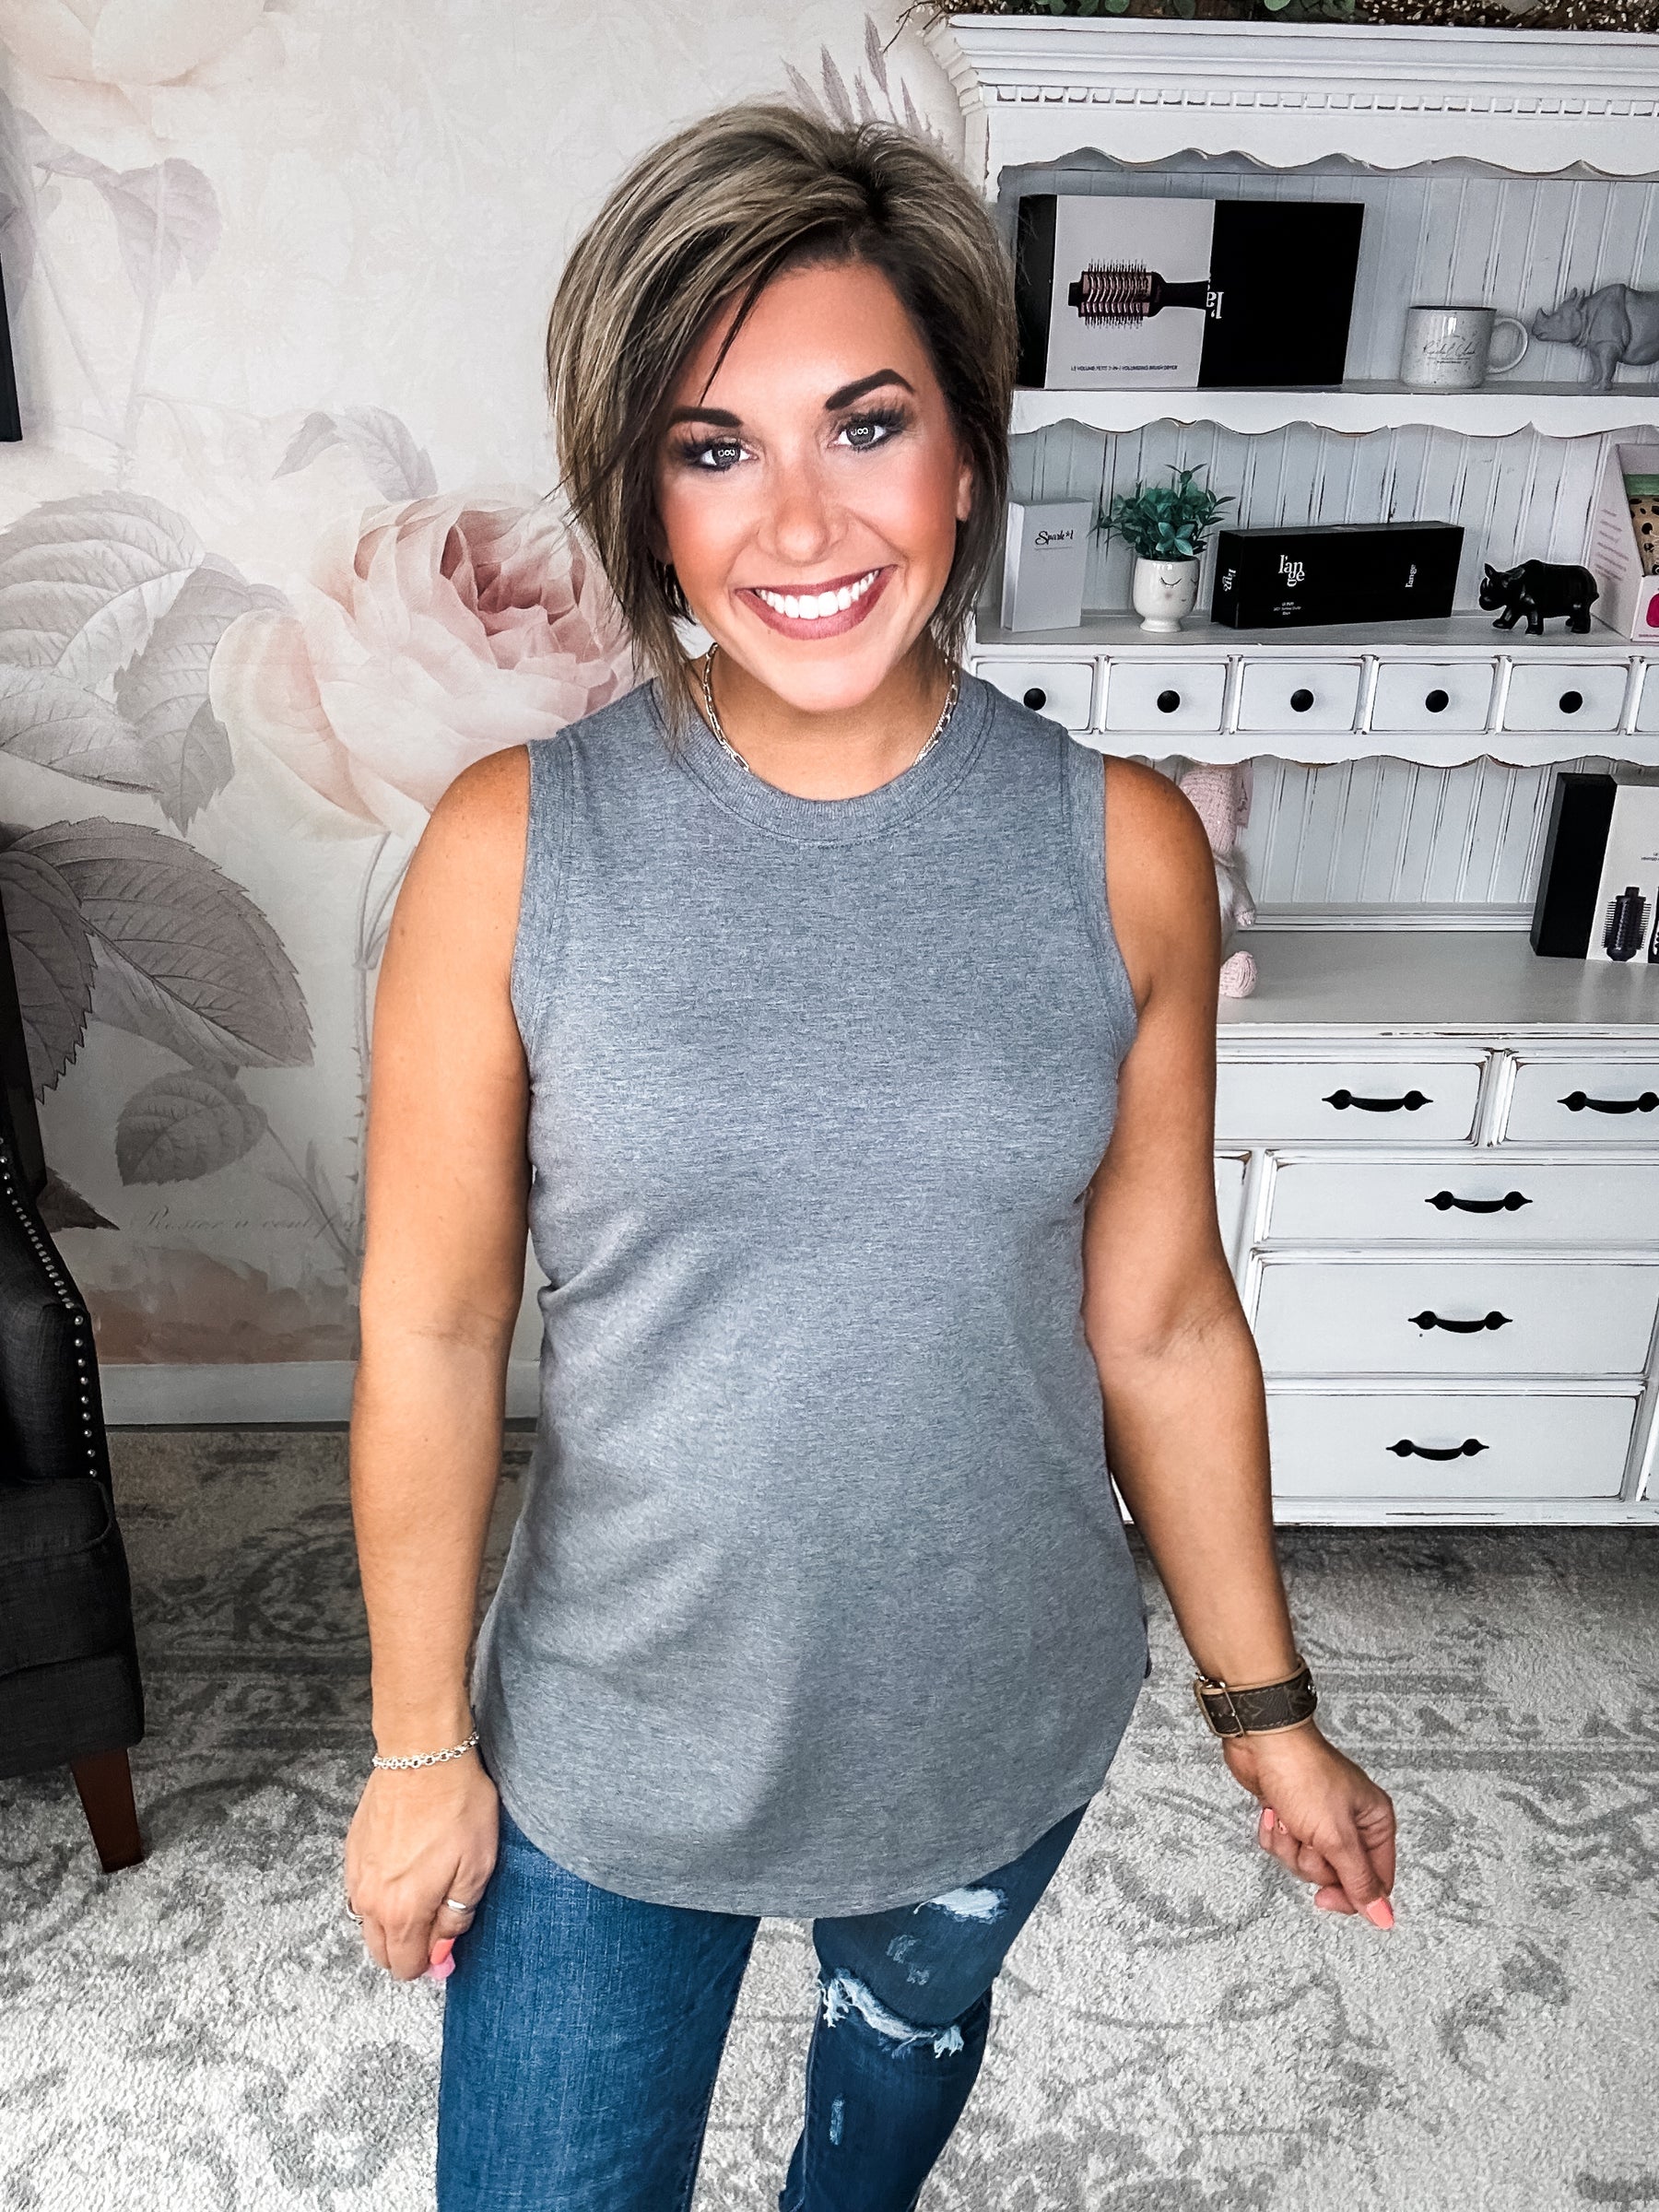 Time To Go Muscle Tank - Heather Grey